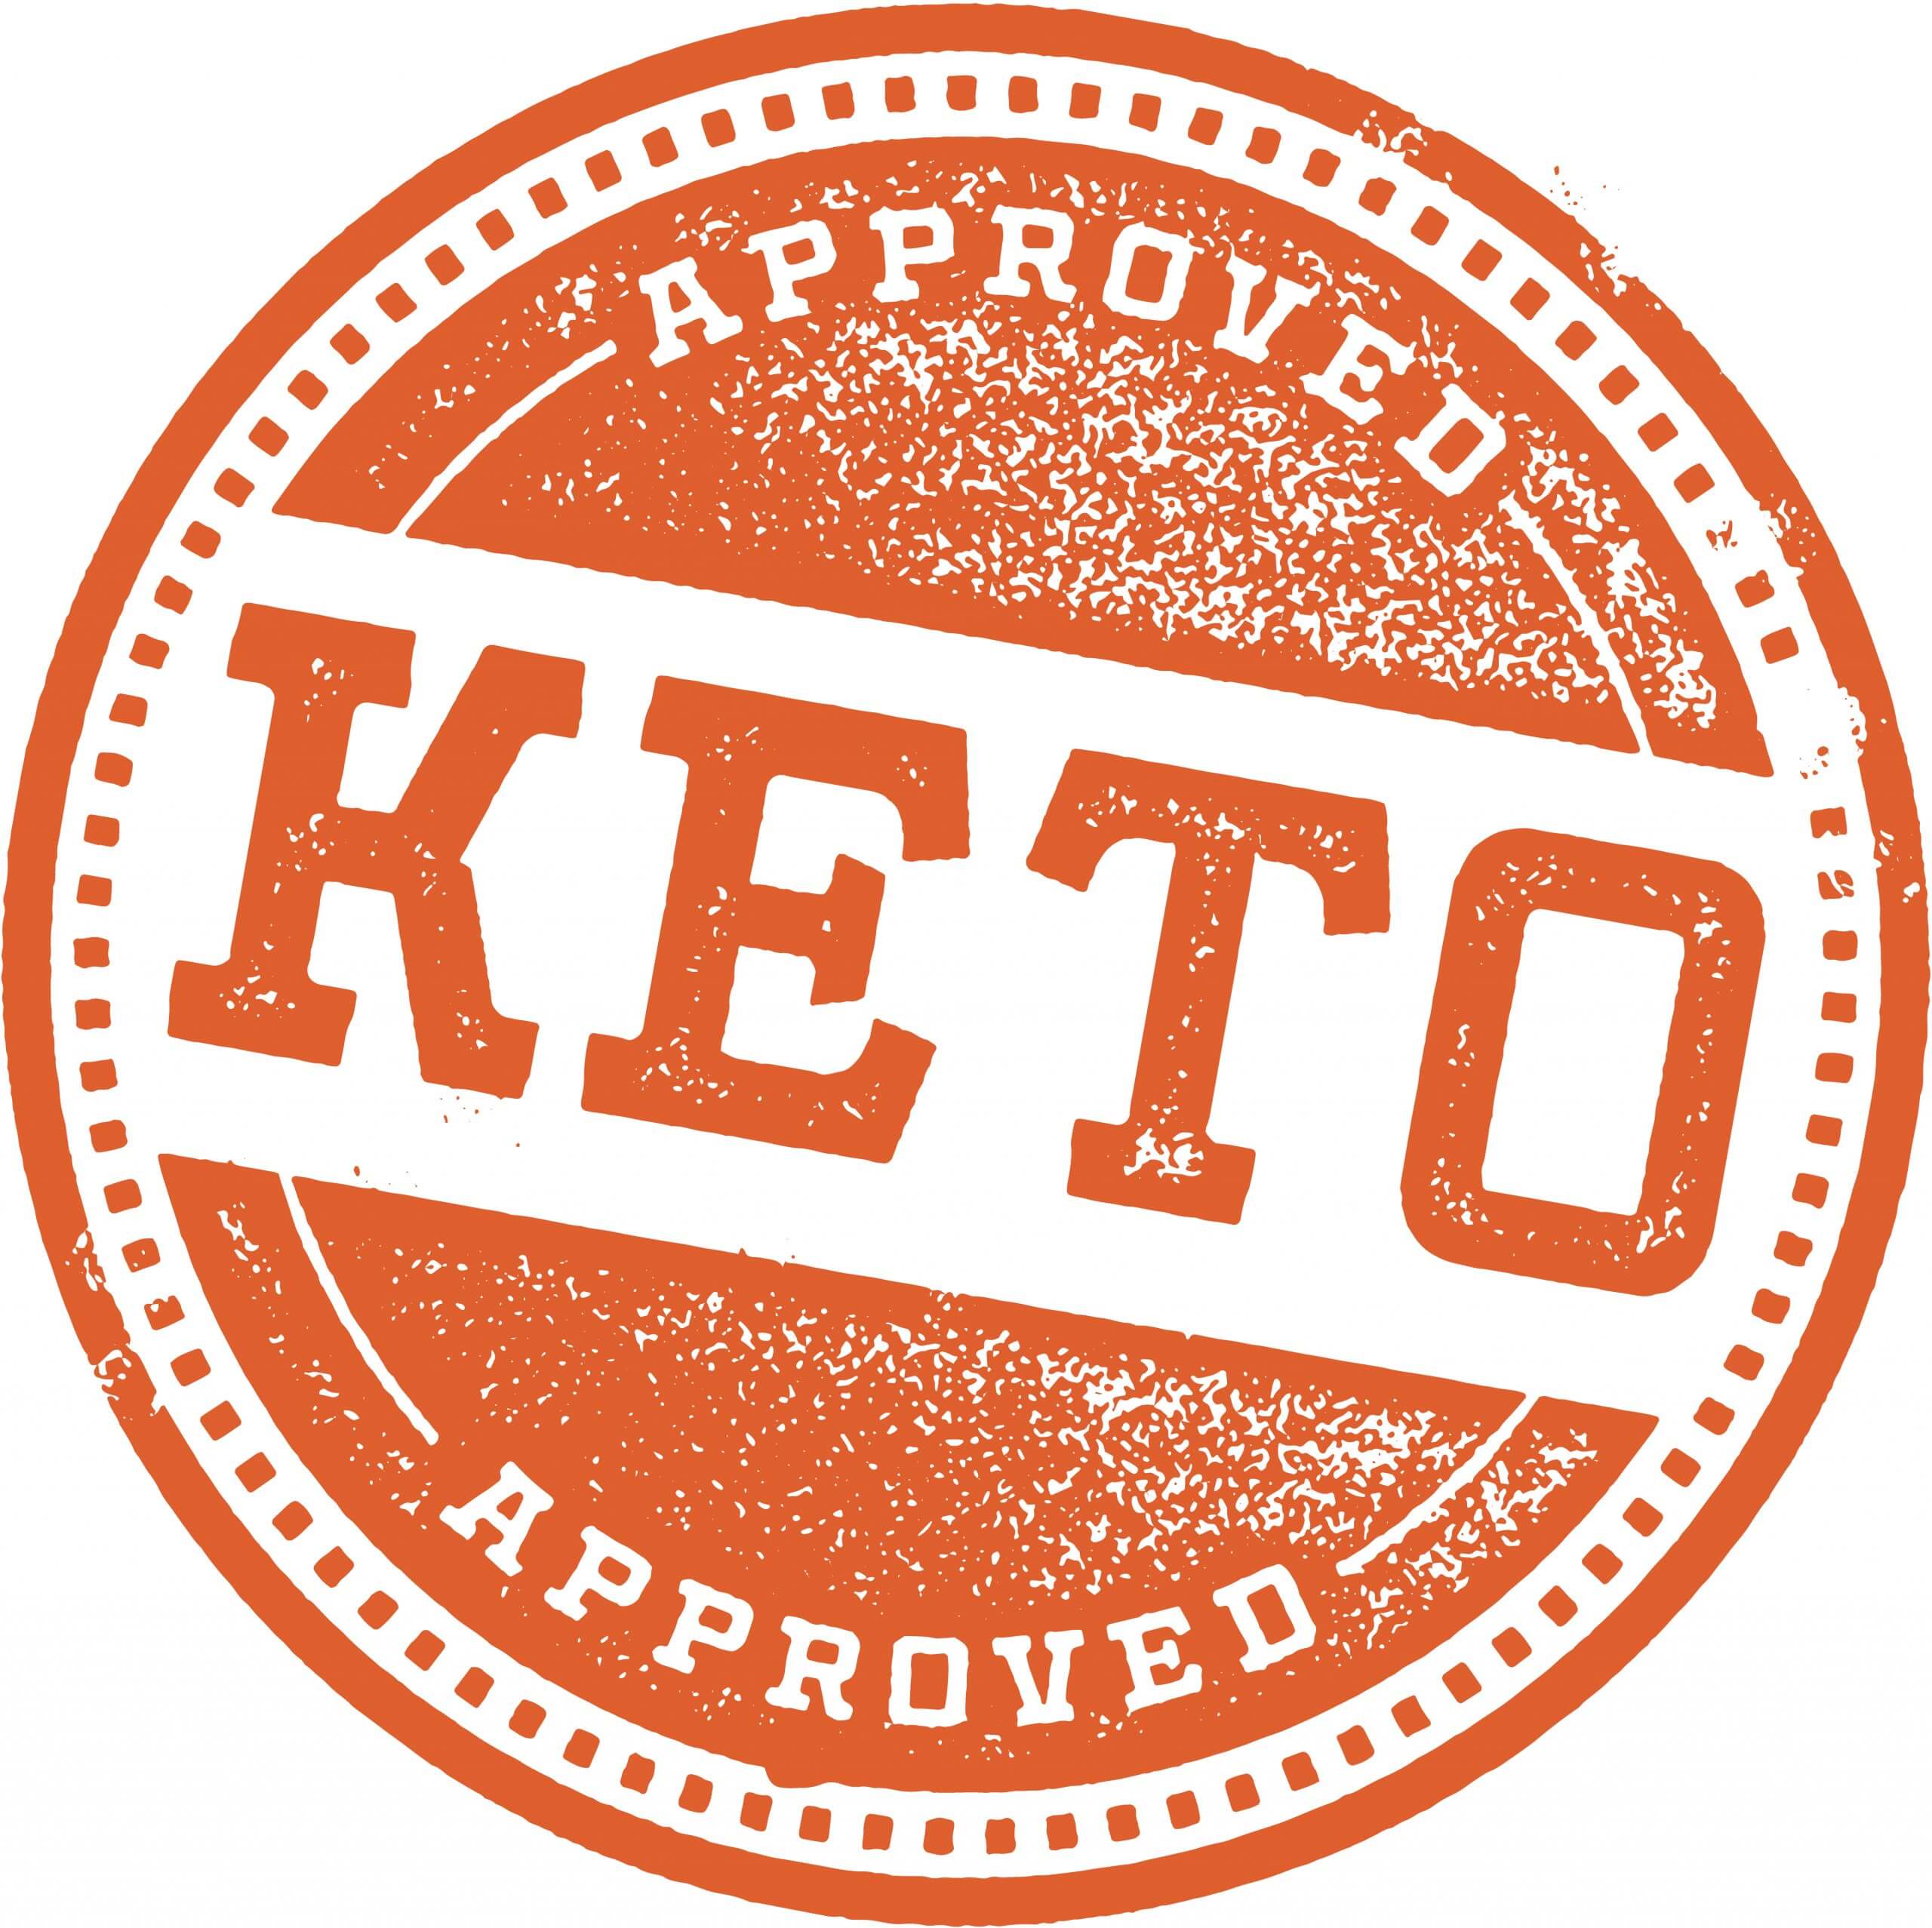 Keto Diet Australia: A complete guide that answers all your questions